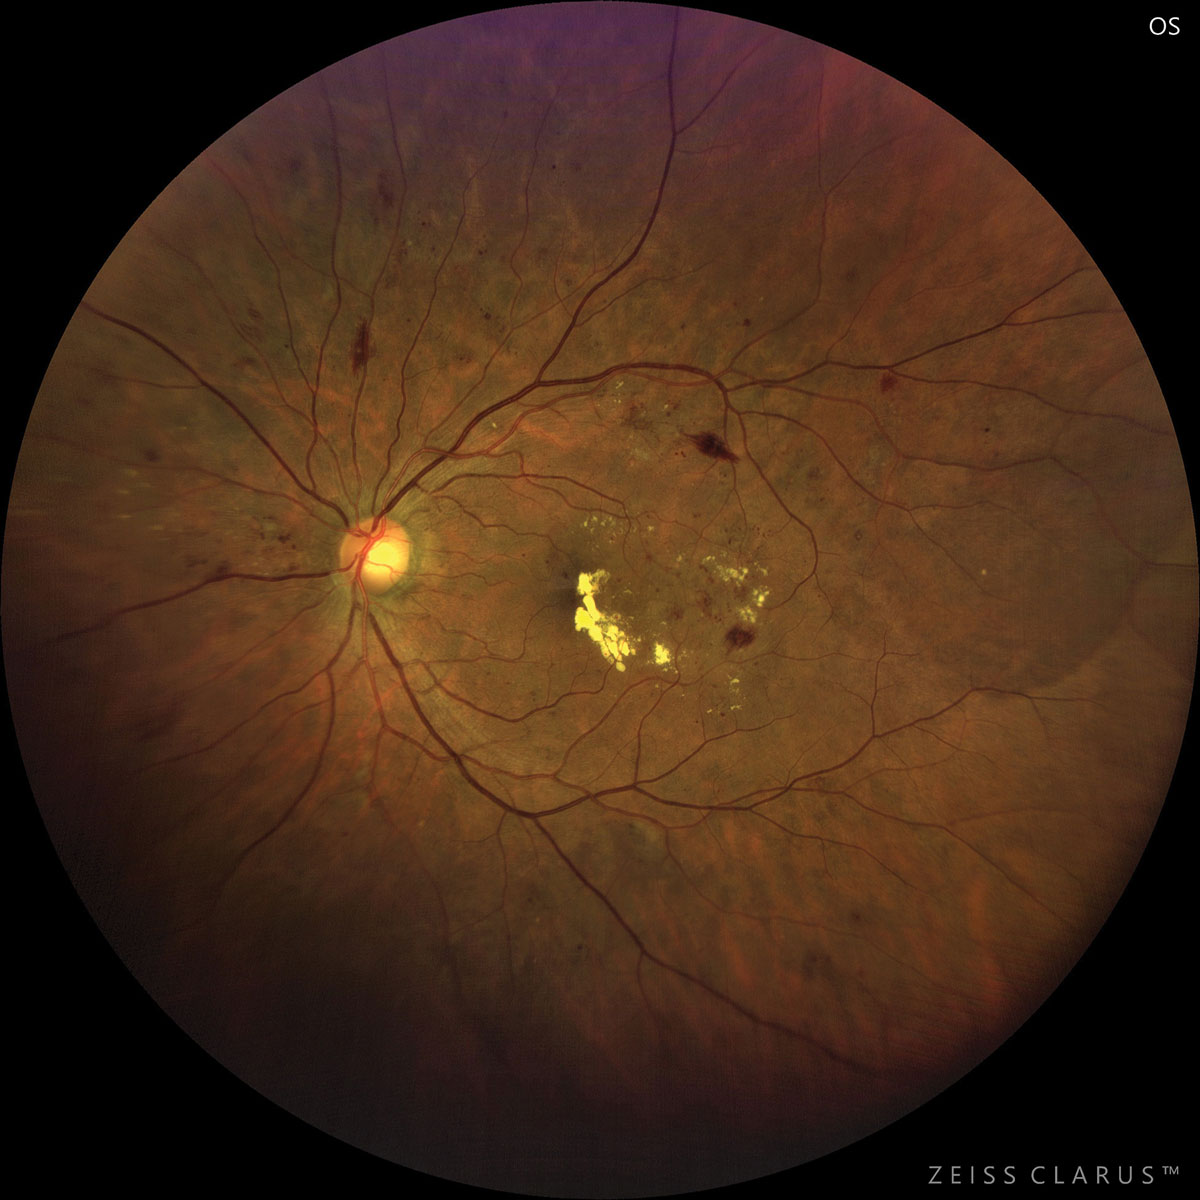 In proliferative disease, white blood cells can enter the retina when the blood-retinal barrier is compromised via neovascularization. This may lead to an increase in white blood cells entering the eye and a decrease in white blood cells in circulation.